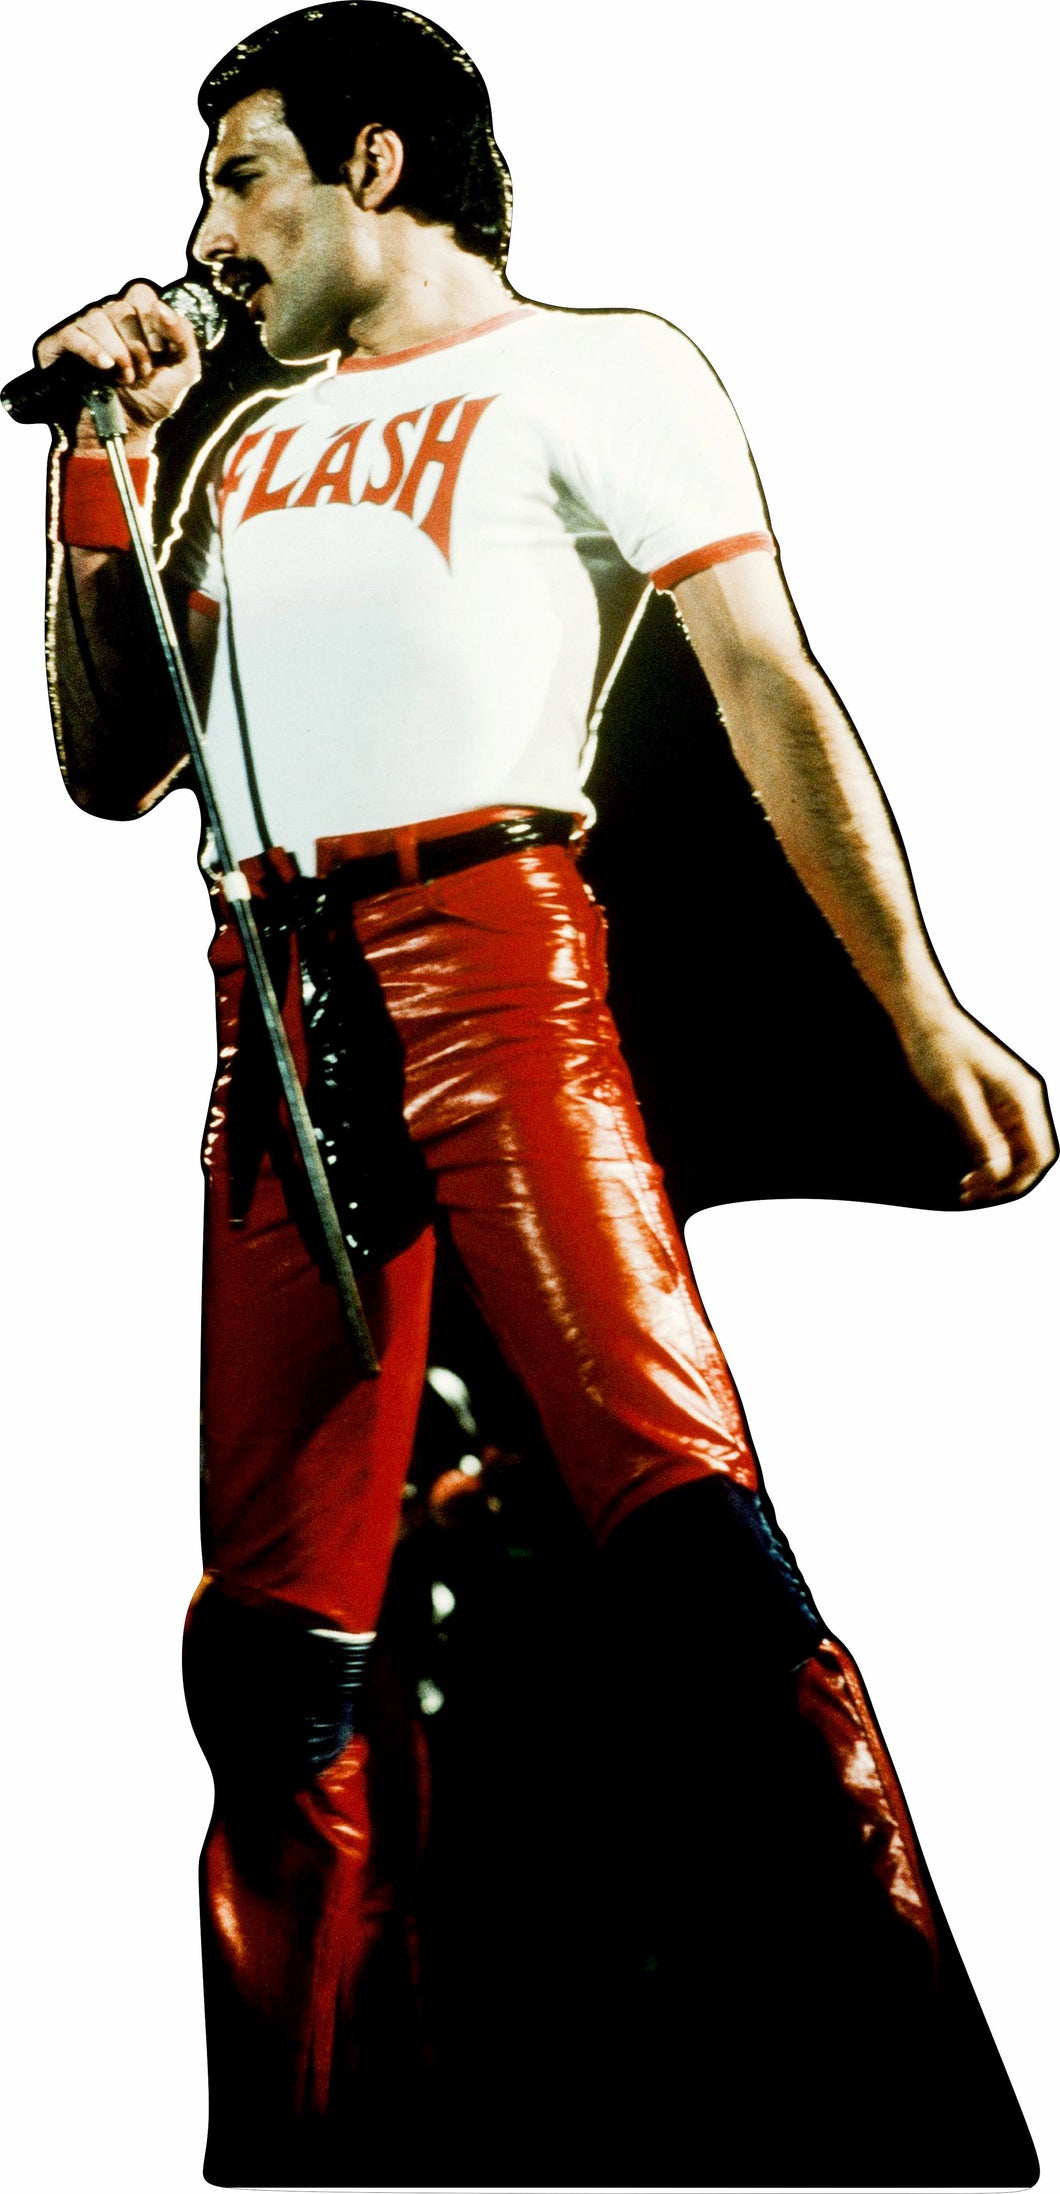 Freddie Mercury with Flash Shirt from Queen 72